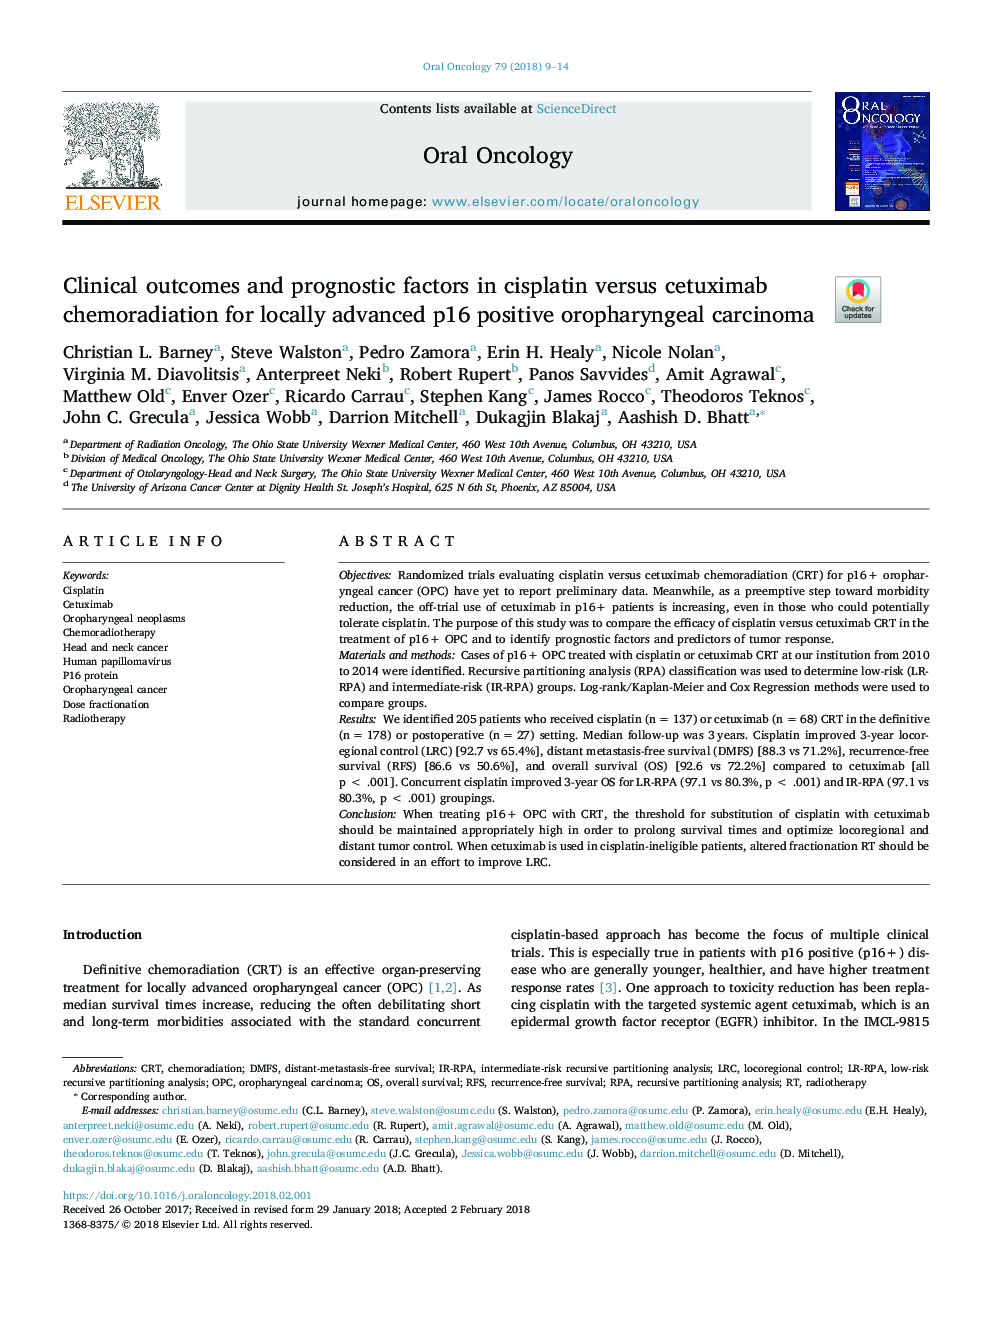 Clinical outcomes and prognostic factors in cisplatin versus cetuximab chemoradiation for locally advanced p16 positive oropharyngeal carcinoma